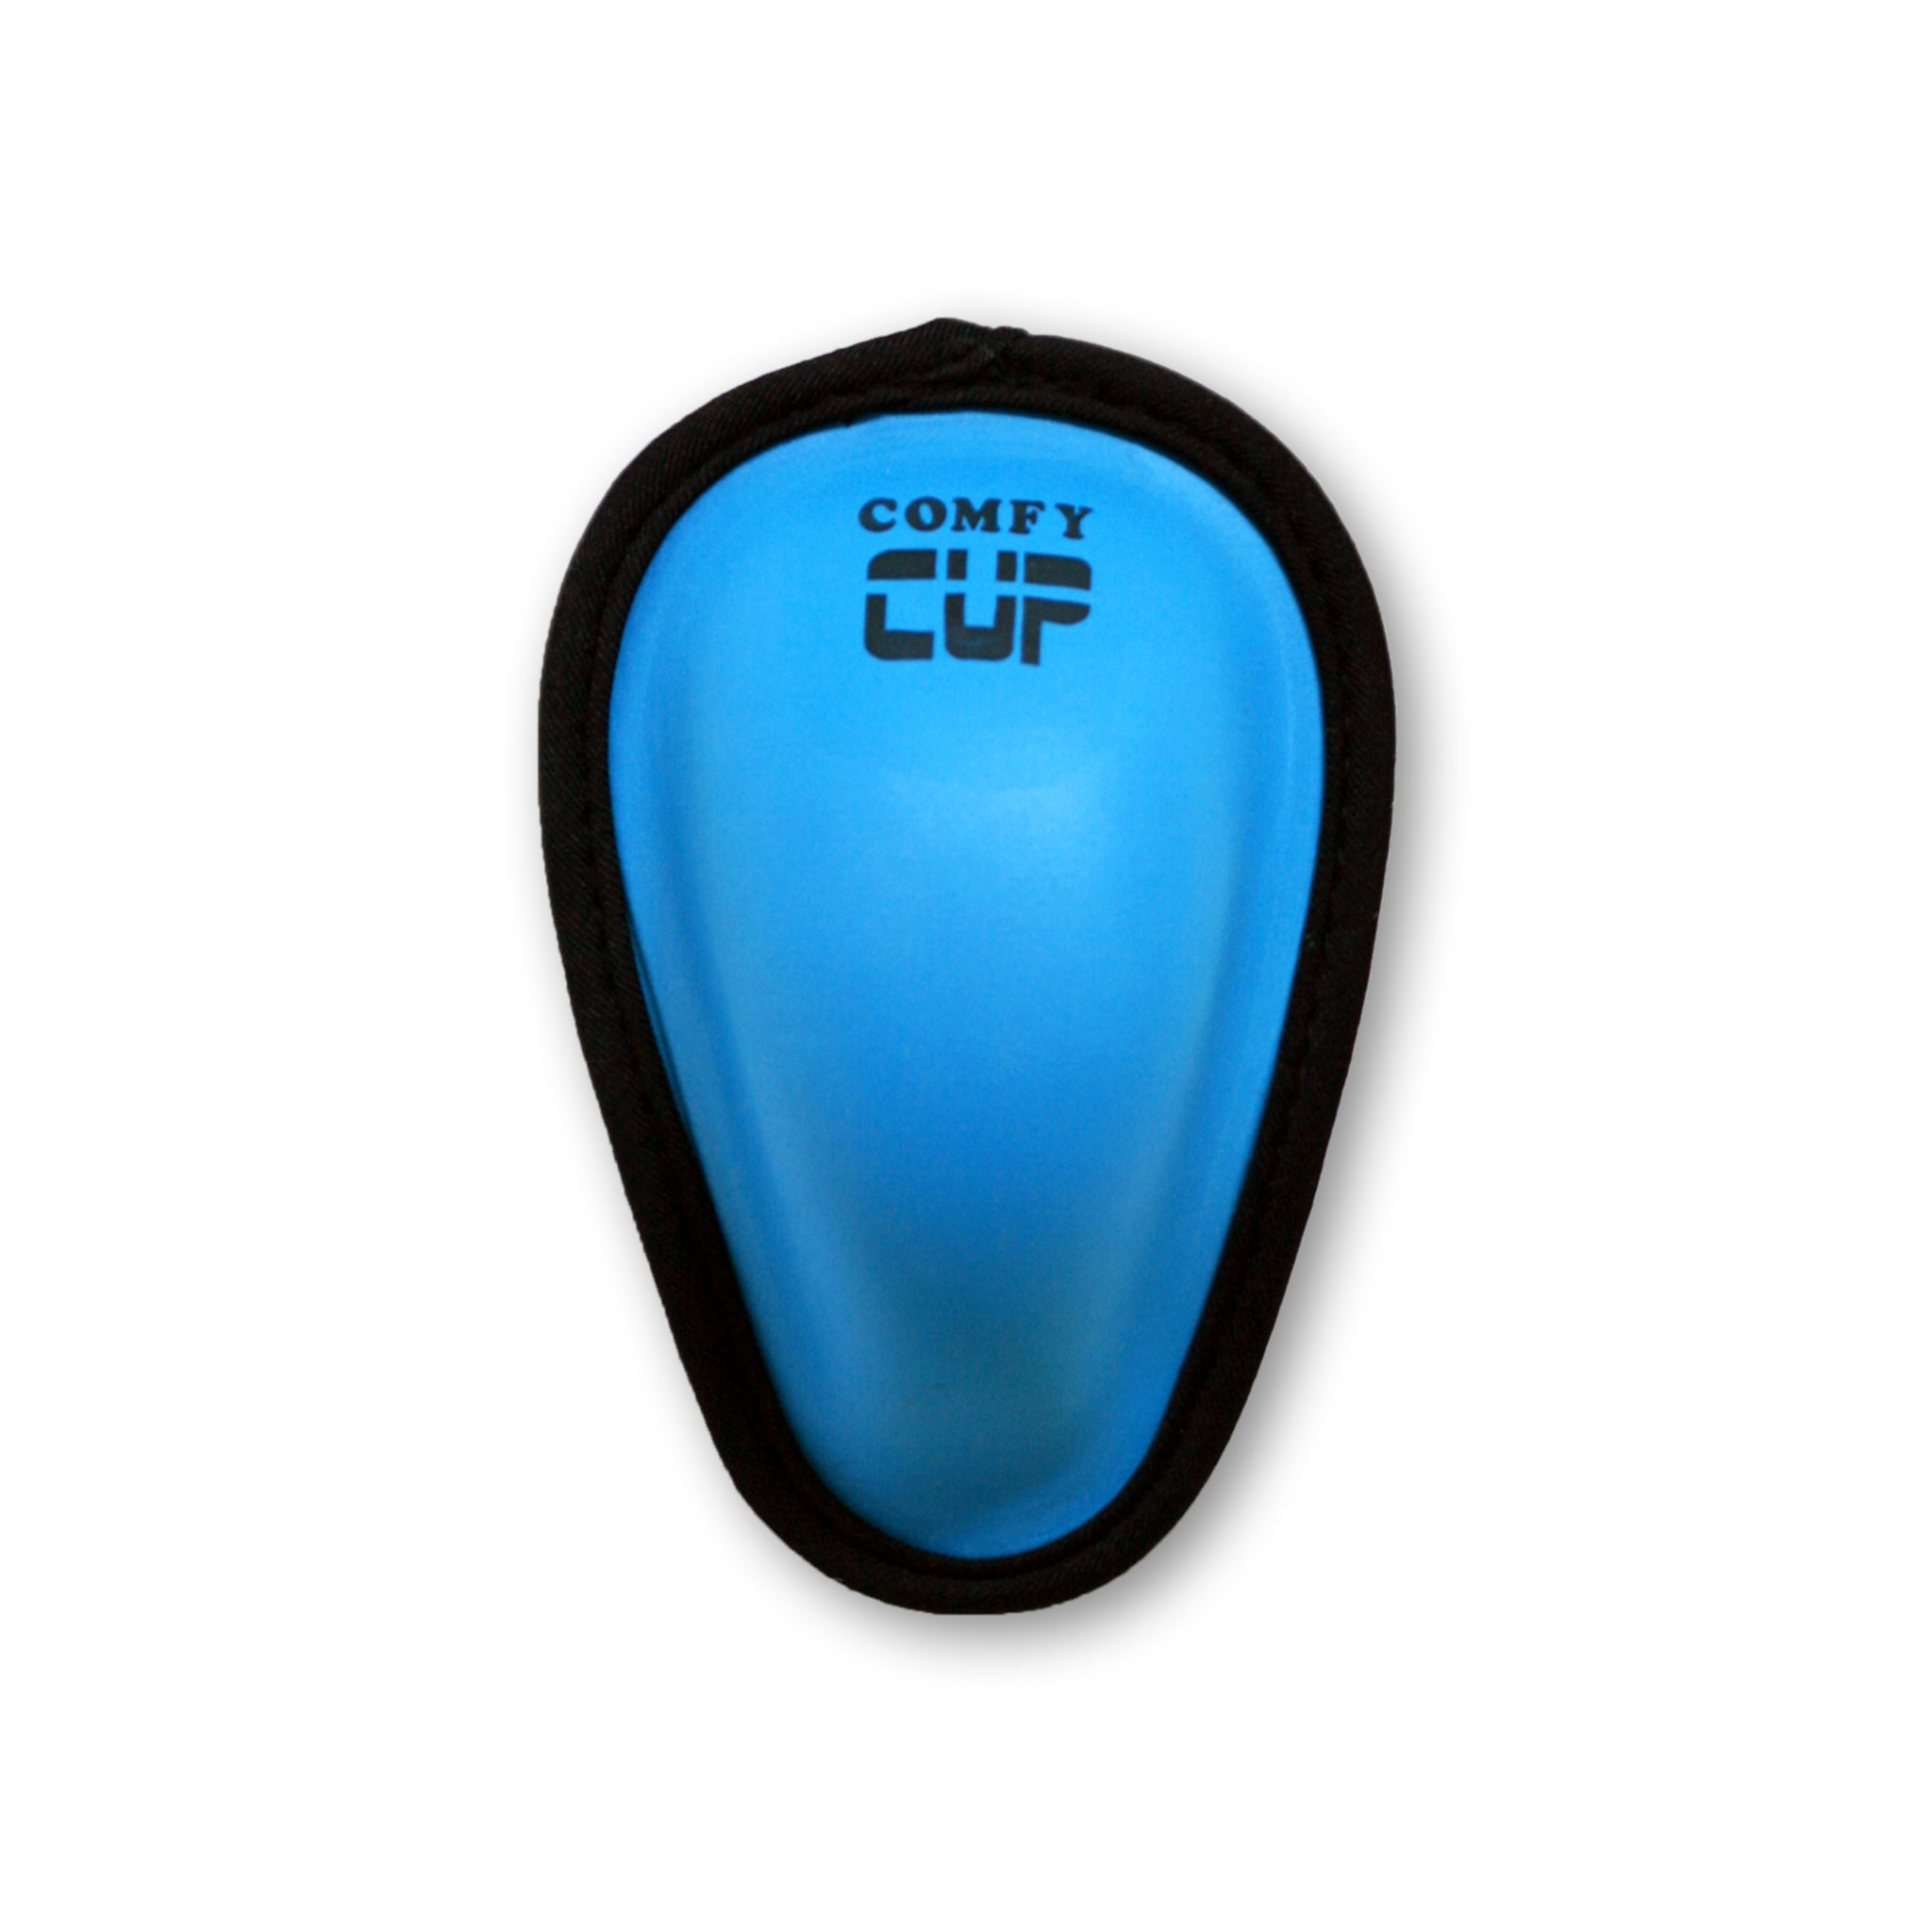 Protective Athletic Cup that is Soft and Works Well for 8-Year Old and –  The Comfy Cup